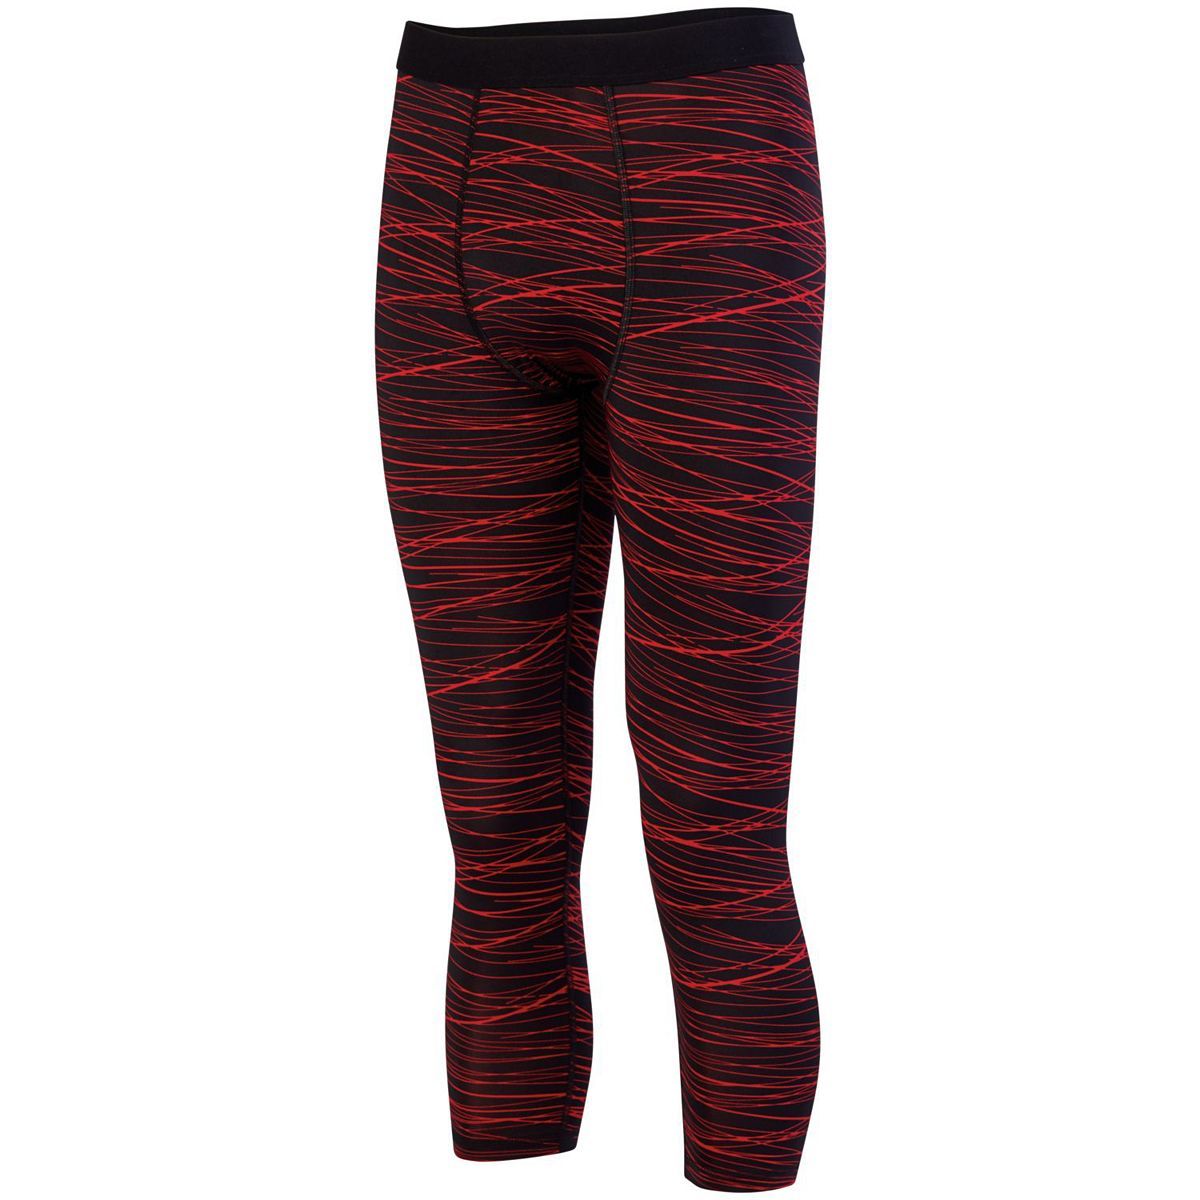 Augusta Sportswear Hyperform Compression Calf-Length Tight in Black/Red Print  -Part of the Adult, Augusta-Products product lines at KanaleyCreations.com